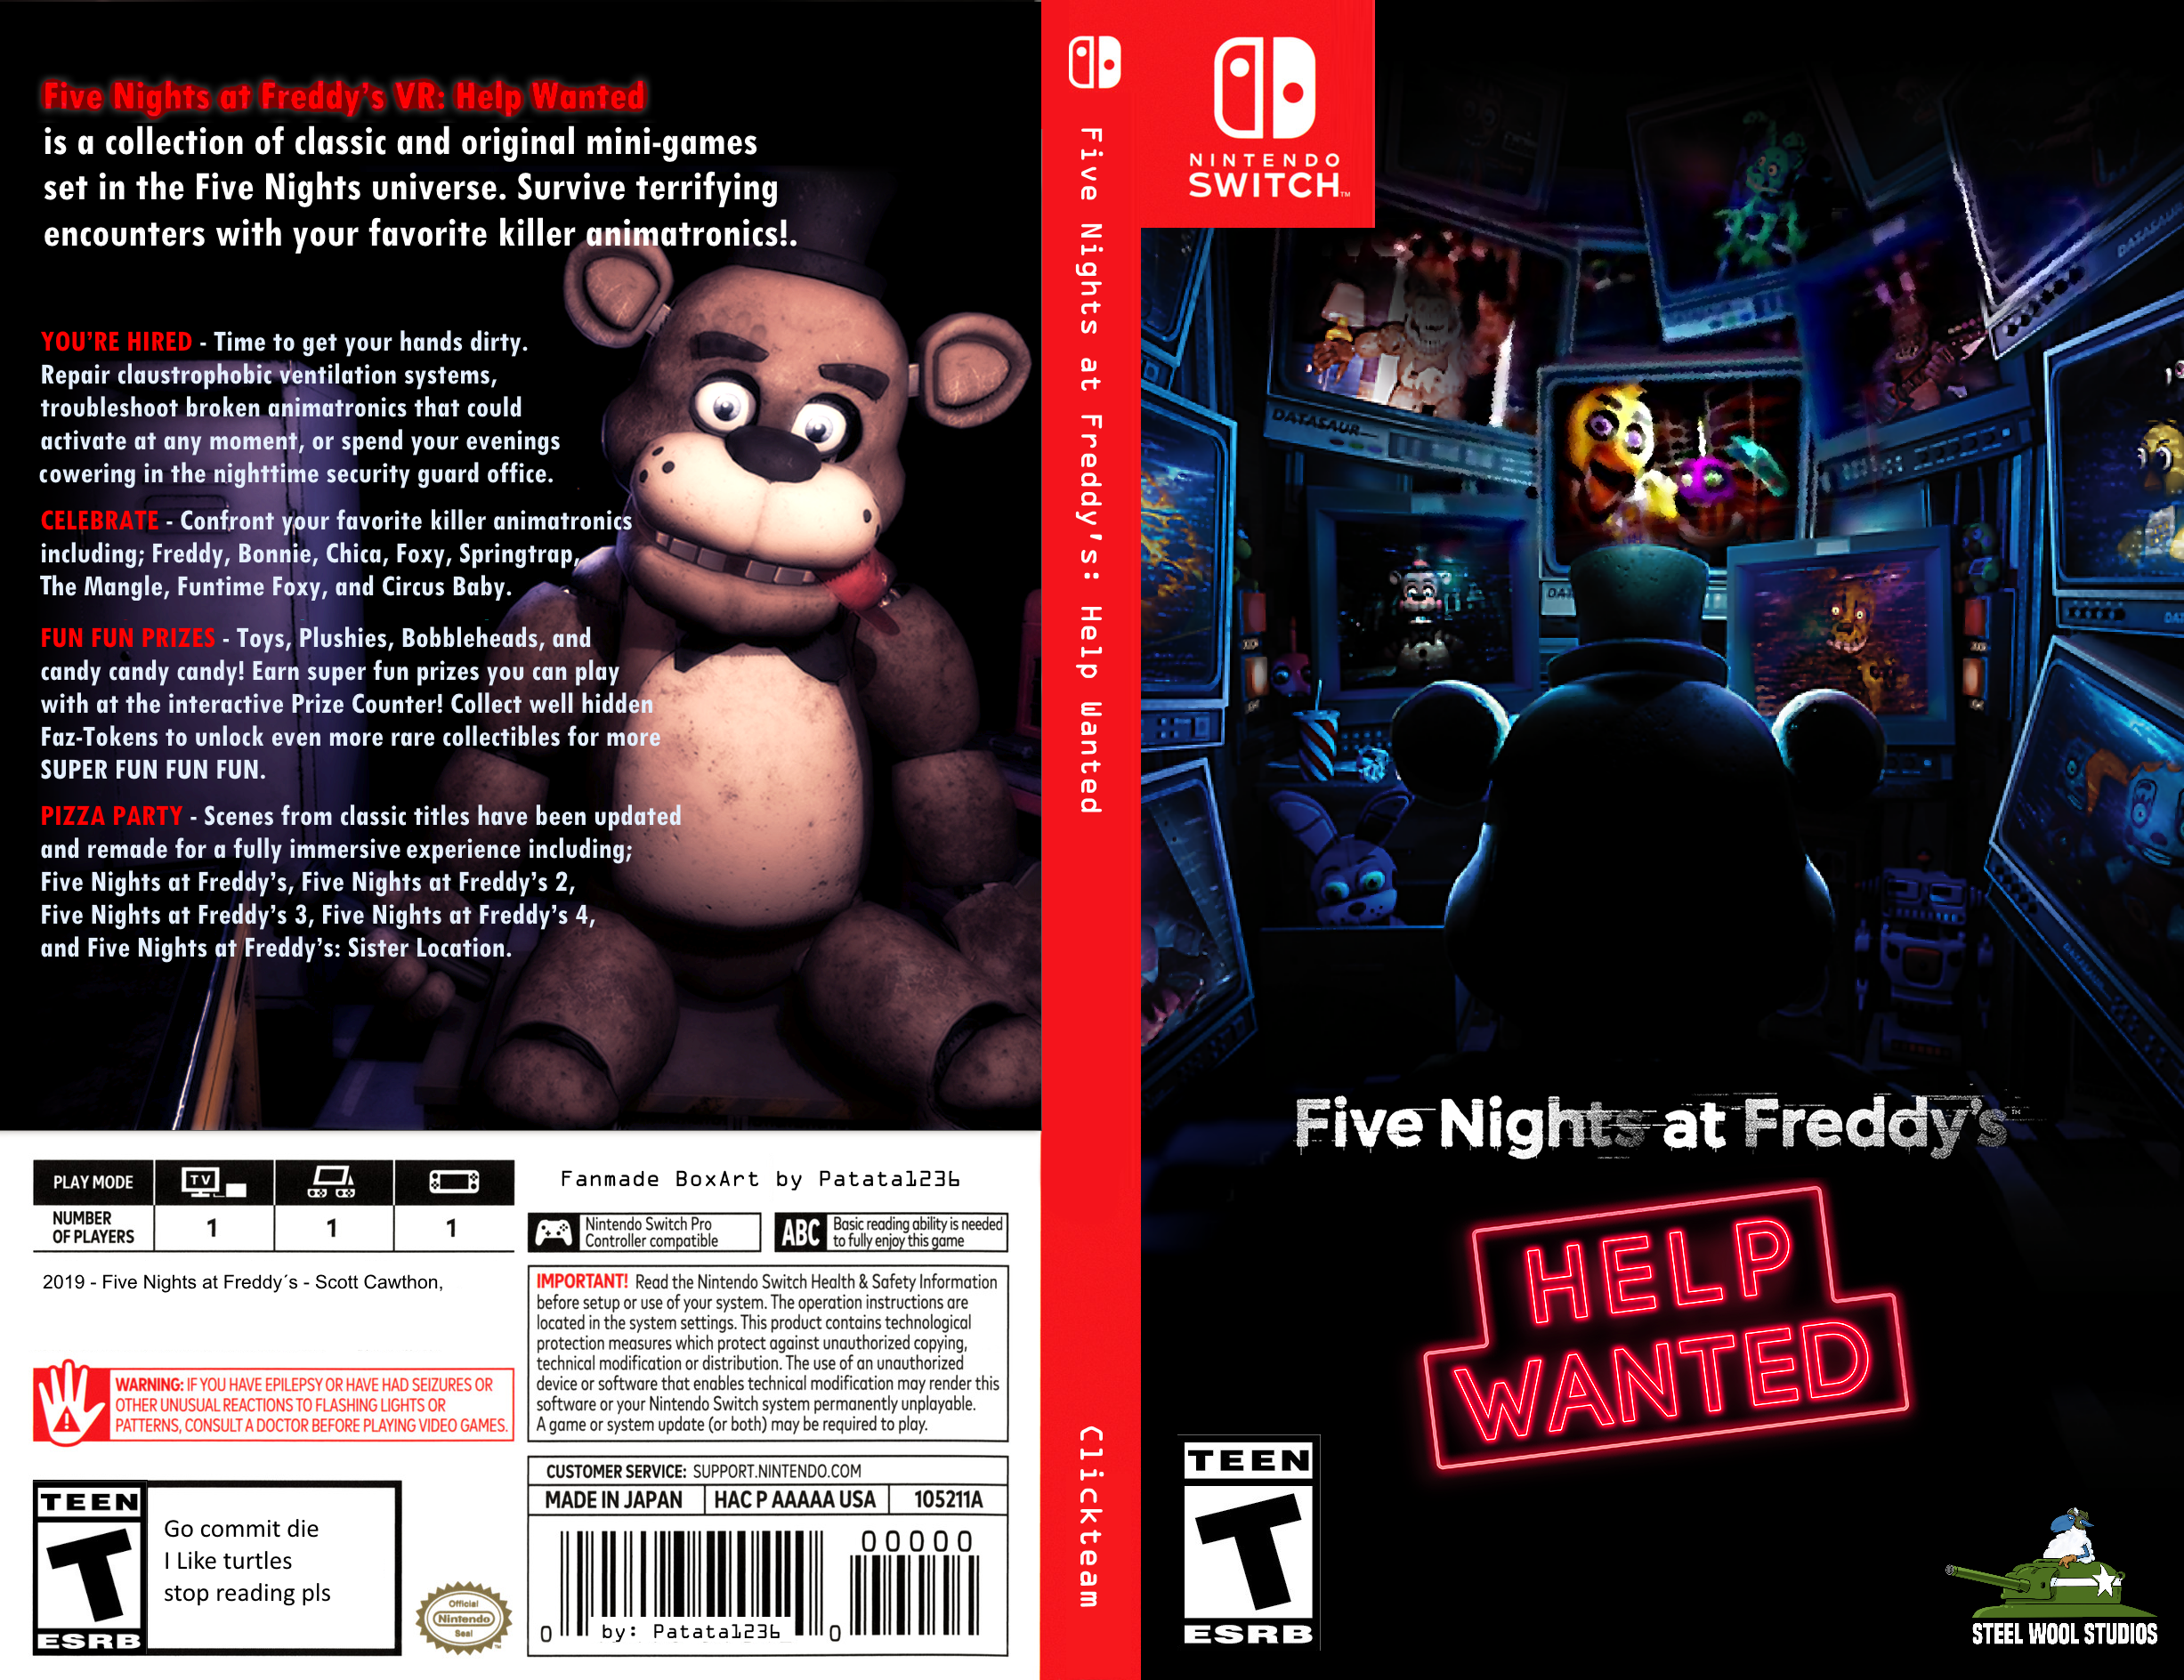 Five Nights at Freddy's - Help Wanted (Nintendo Switch)